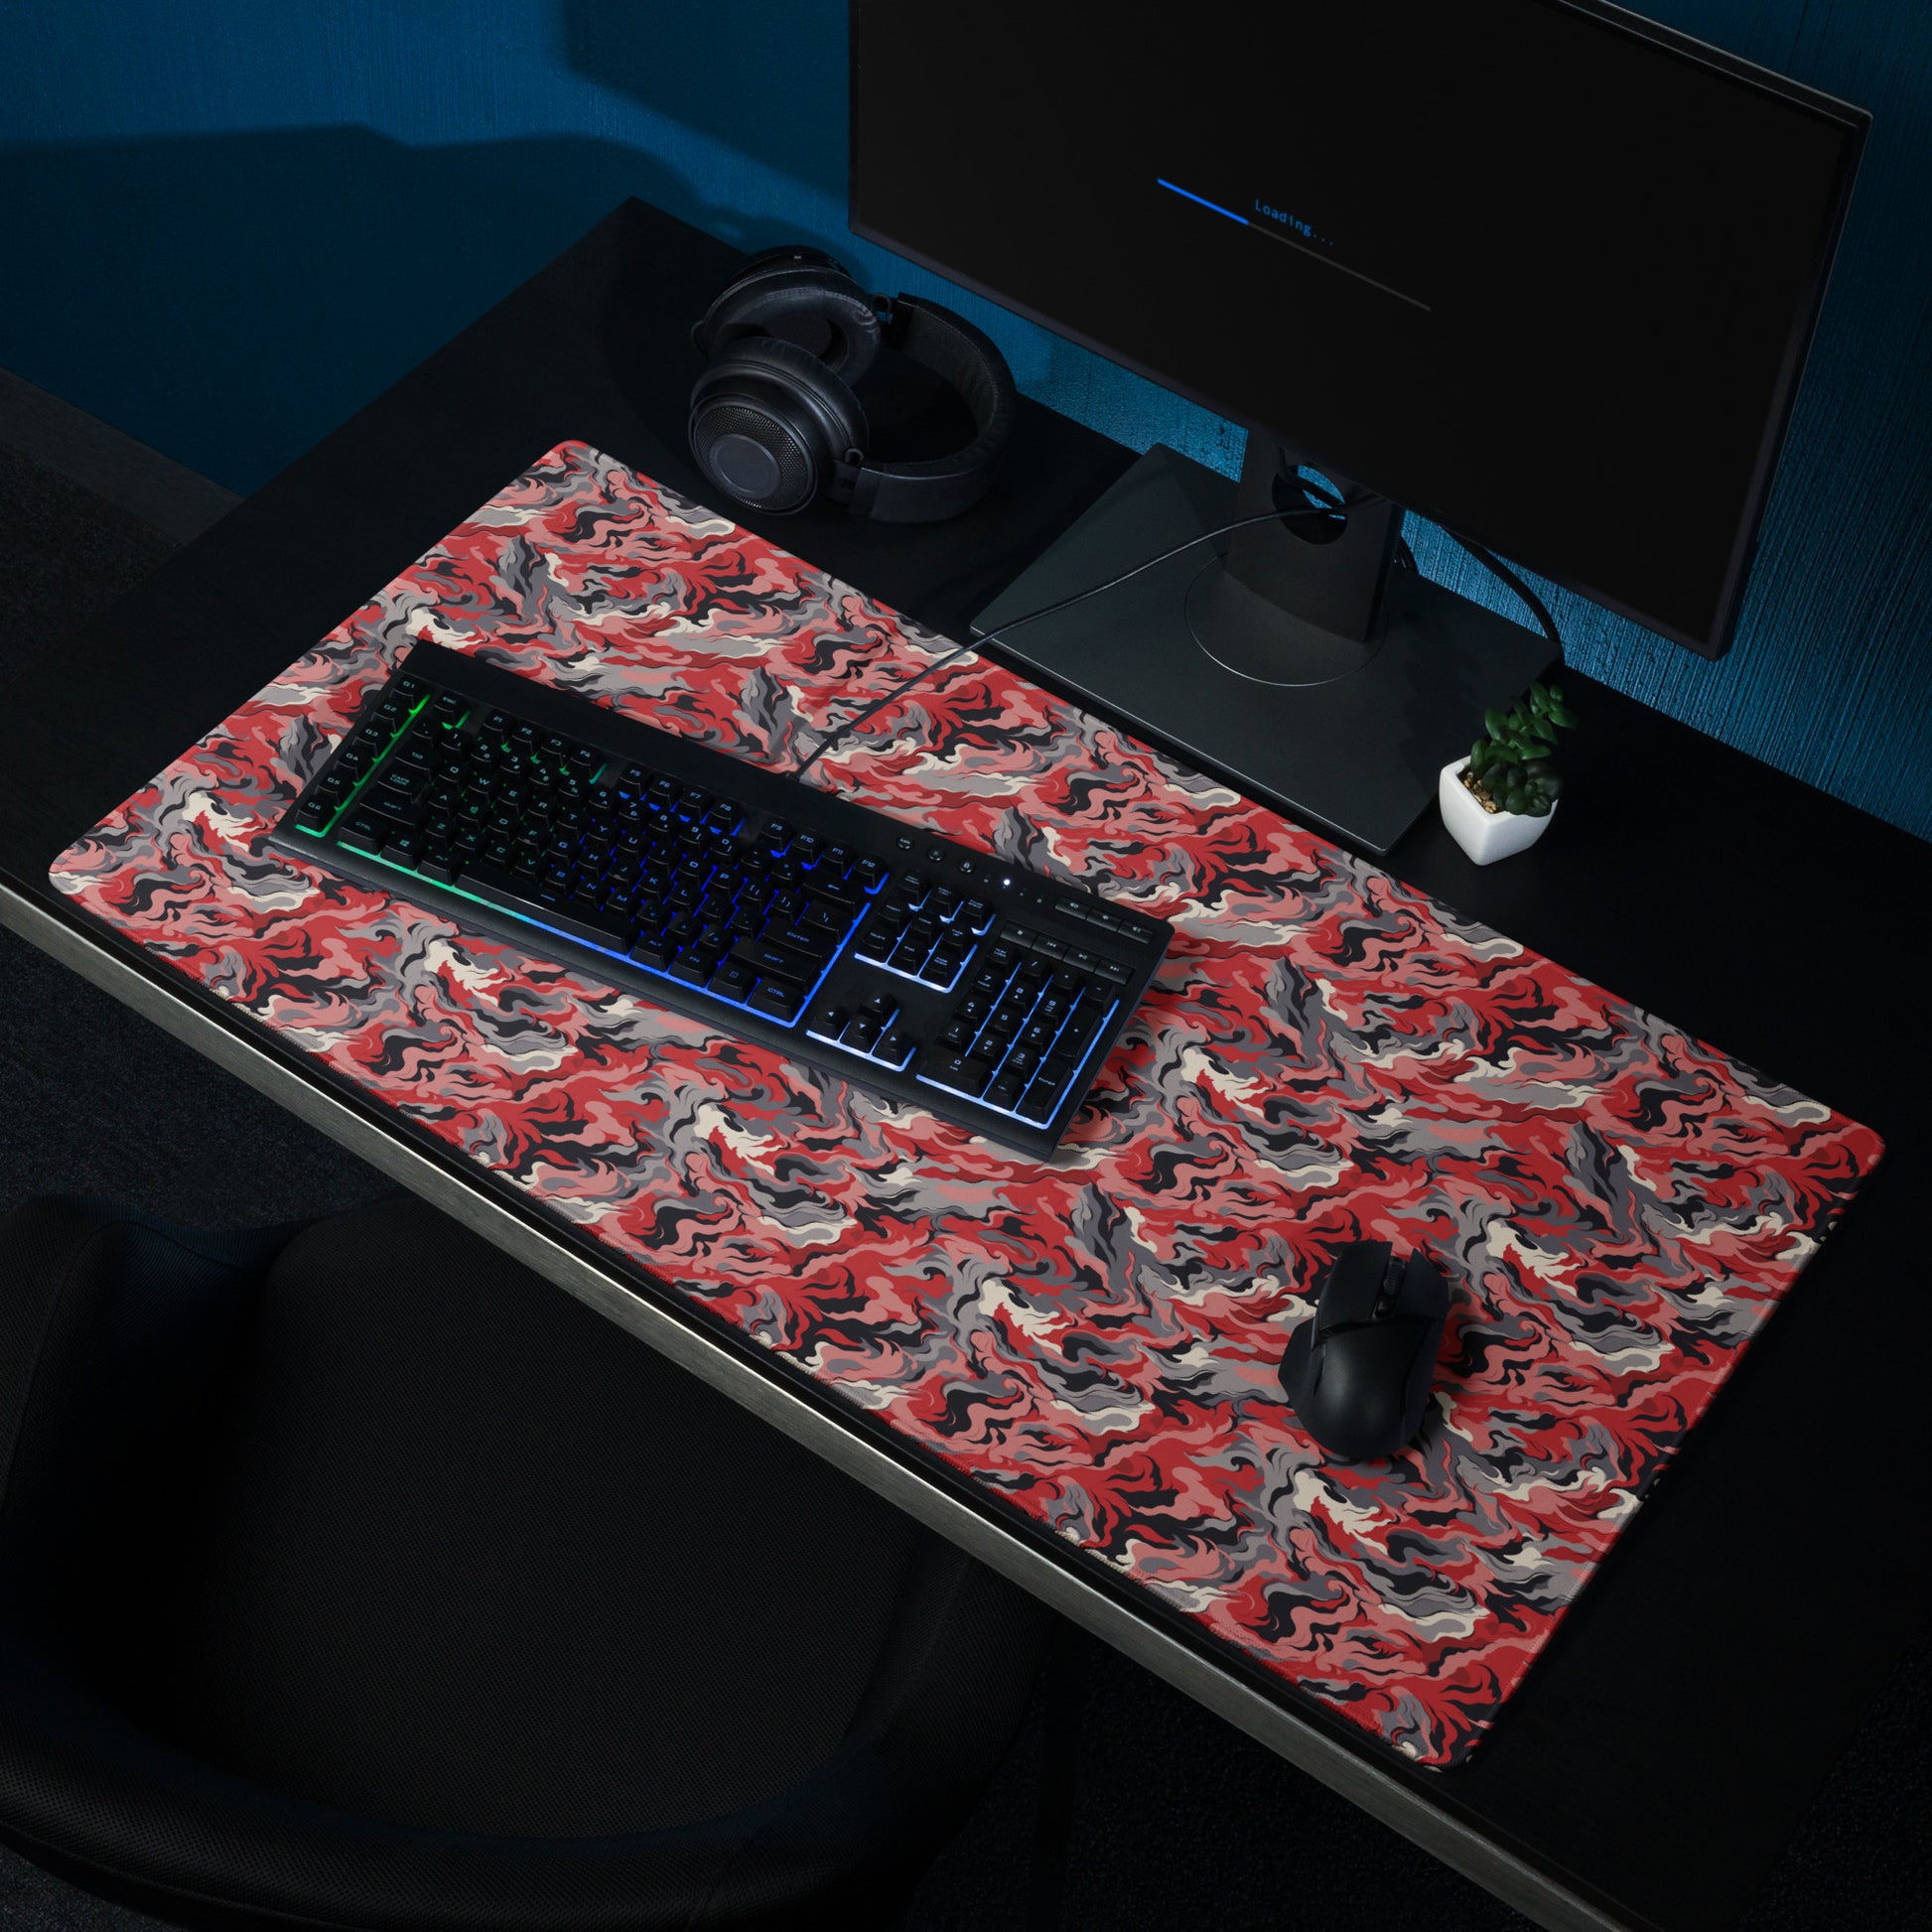 A 36" x 18" desk pad with a grey and red camo pattern sitting on a desk.